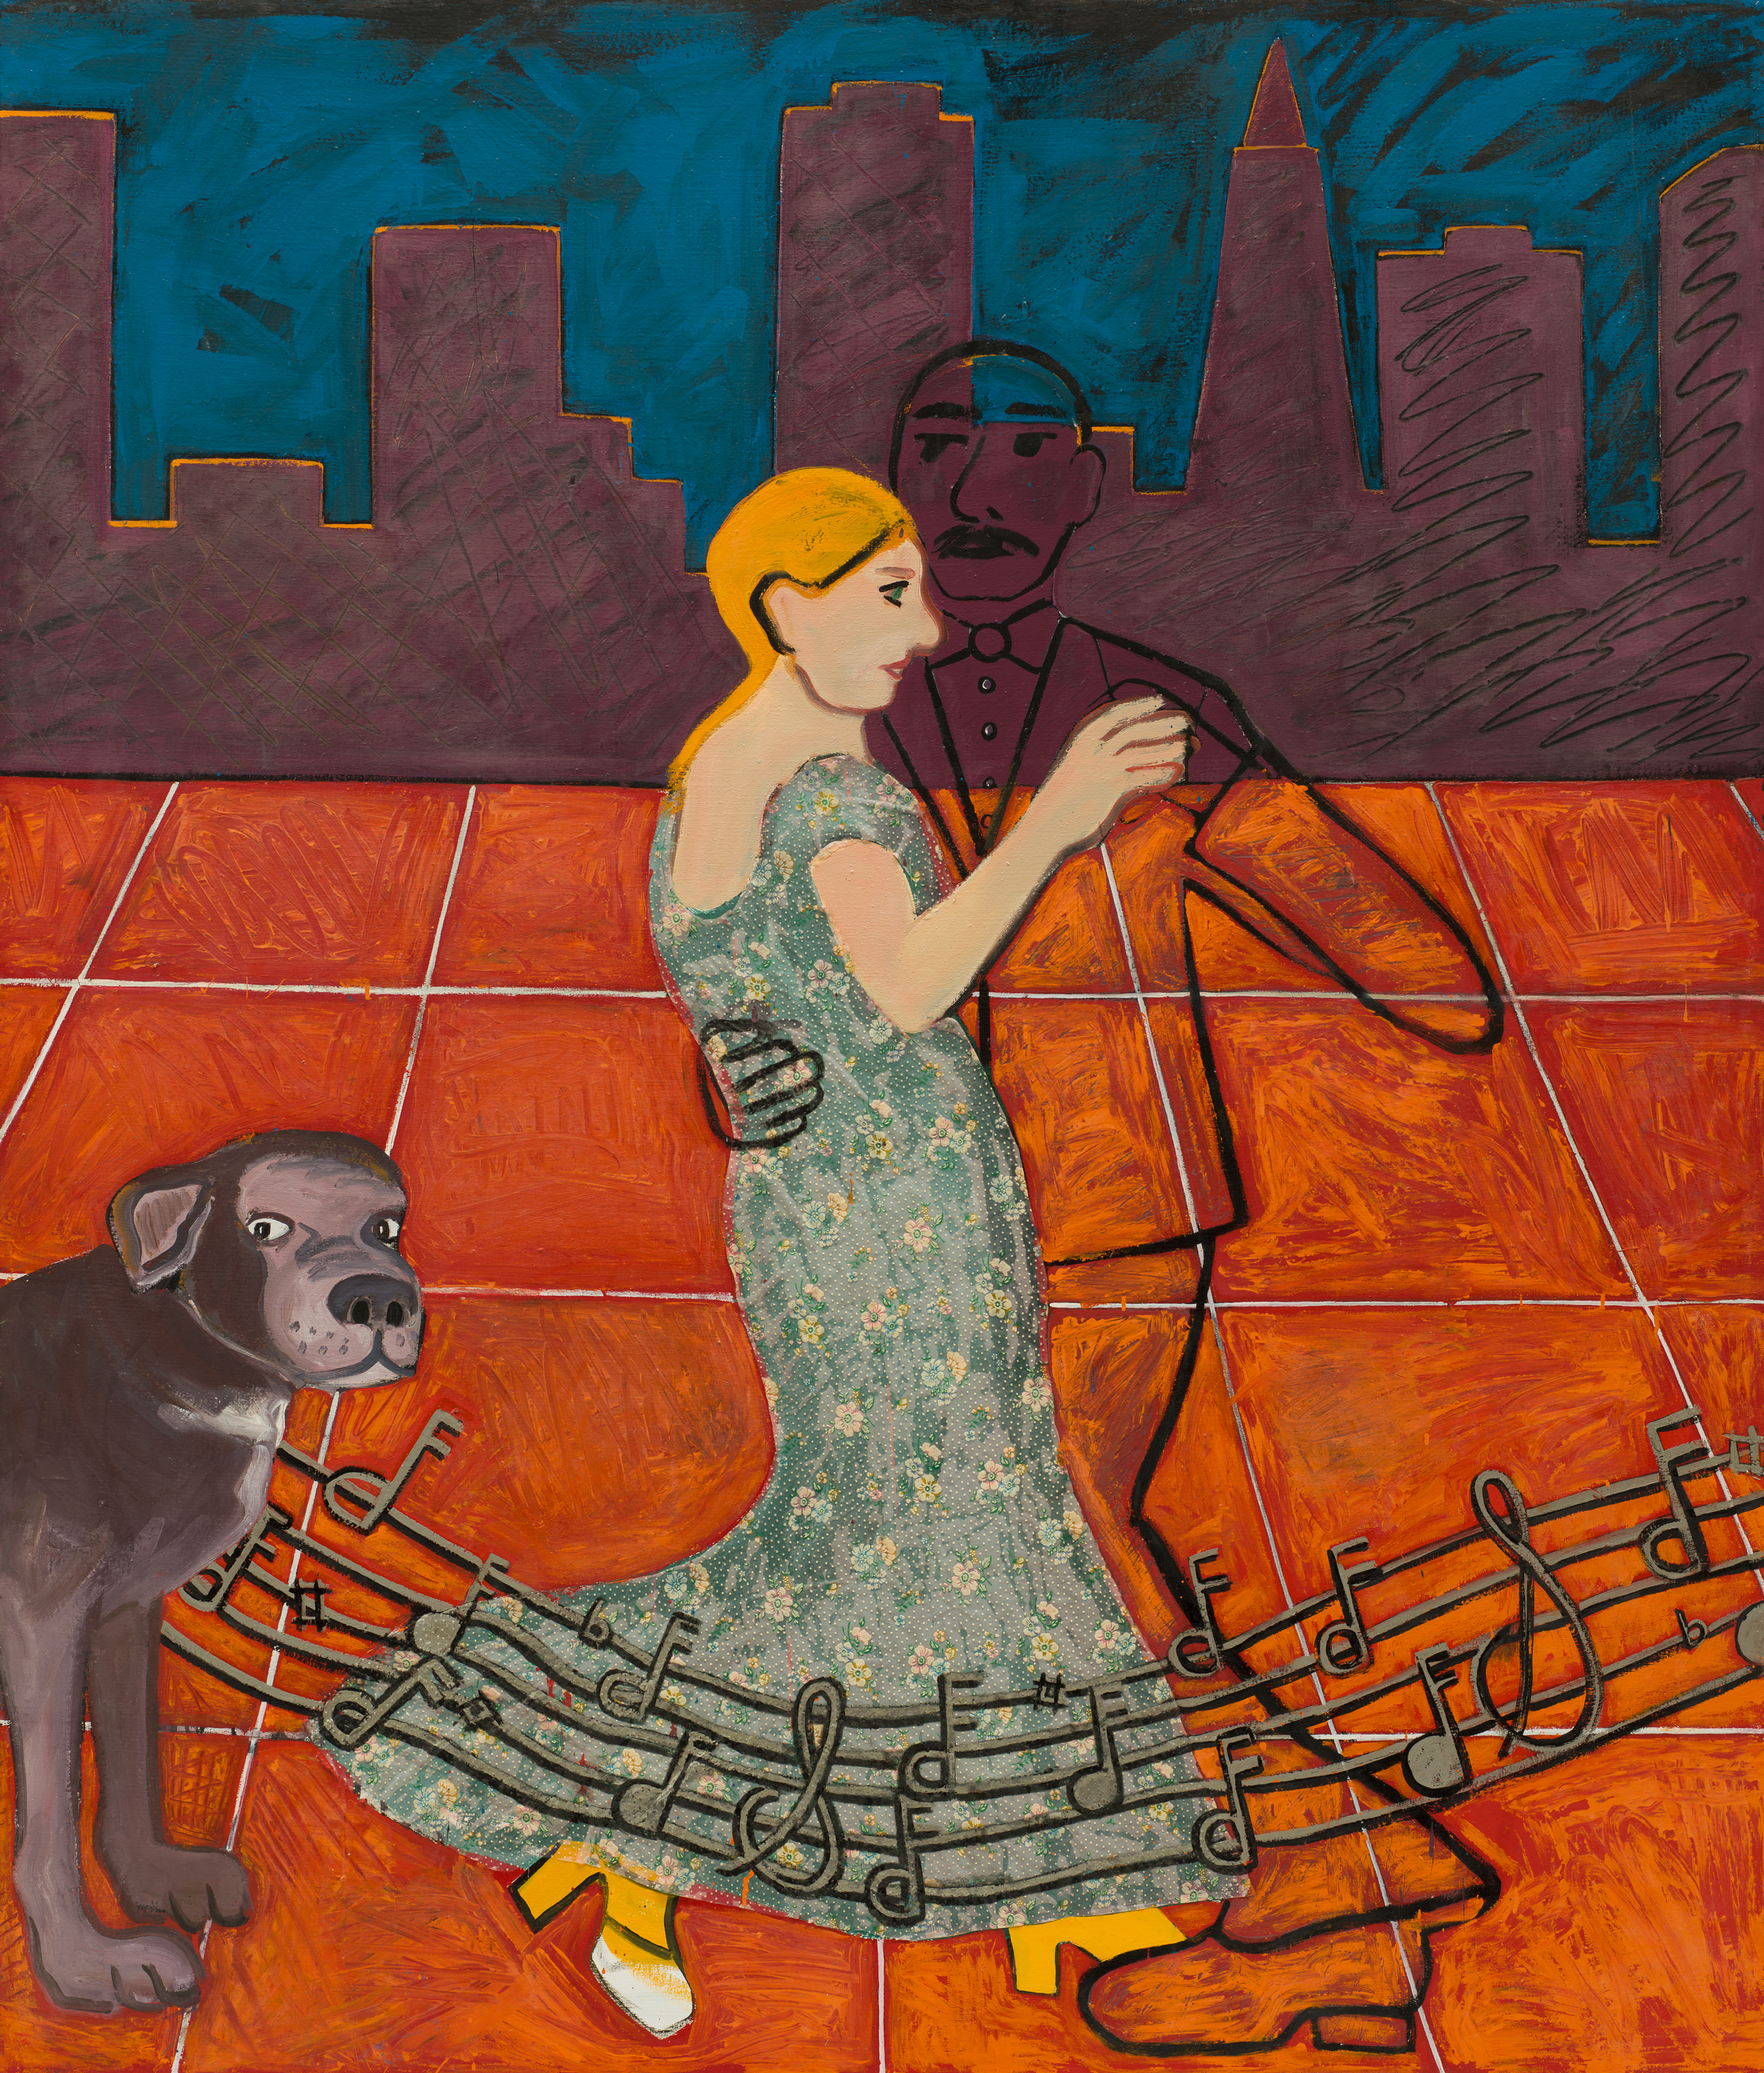 Dancers in the city by Joan Brown. Features a women dancing with the outline of a man as music as music notes flow. A dog is also nearby